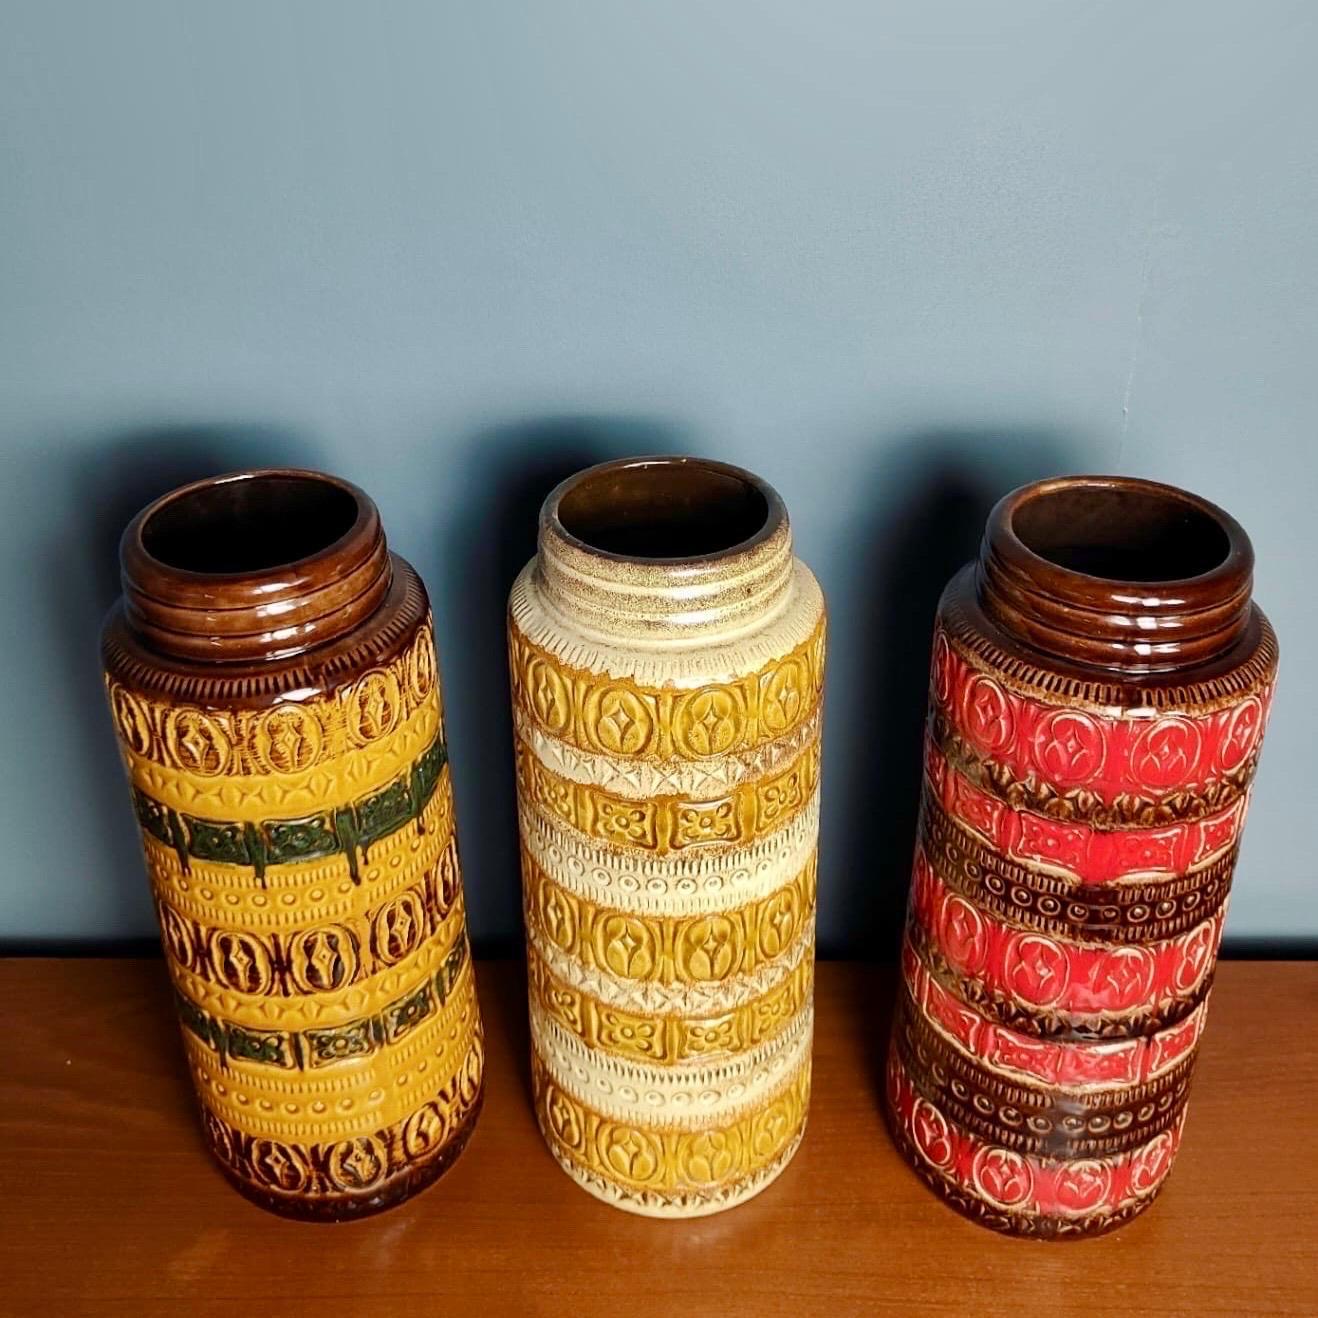 New Stock ✅

3 Large West German Vases Pottery Mid Century Vintage Retro MCM

Selling as a set of 3.

Great mid century colours and in perfect condition. No chips or cracks to them.

Dimensions
Height - 41cm
Width - 15cm
Depth - 15cm
Diameter - 15cm